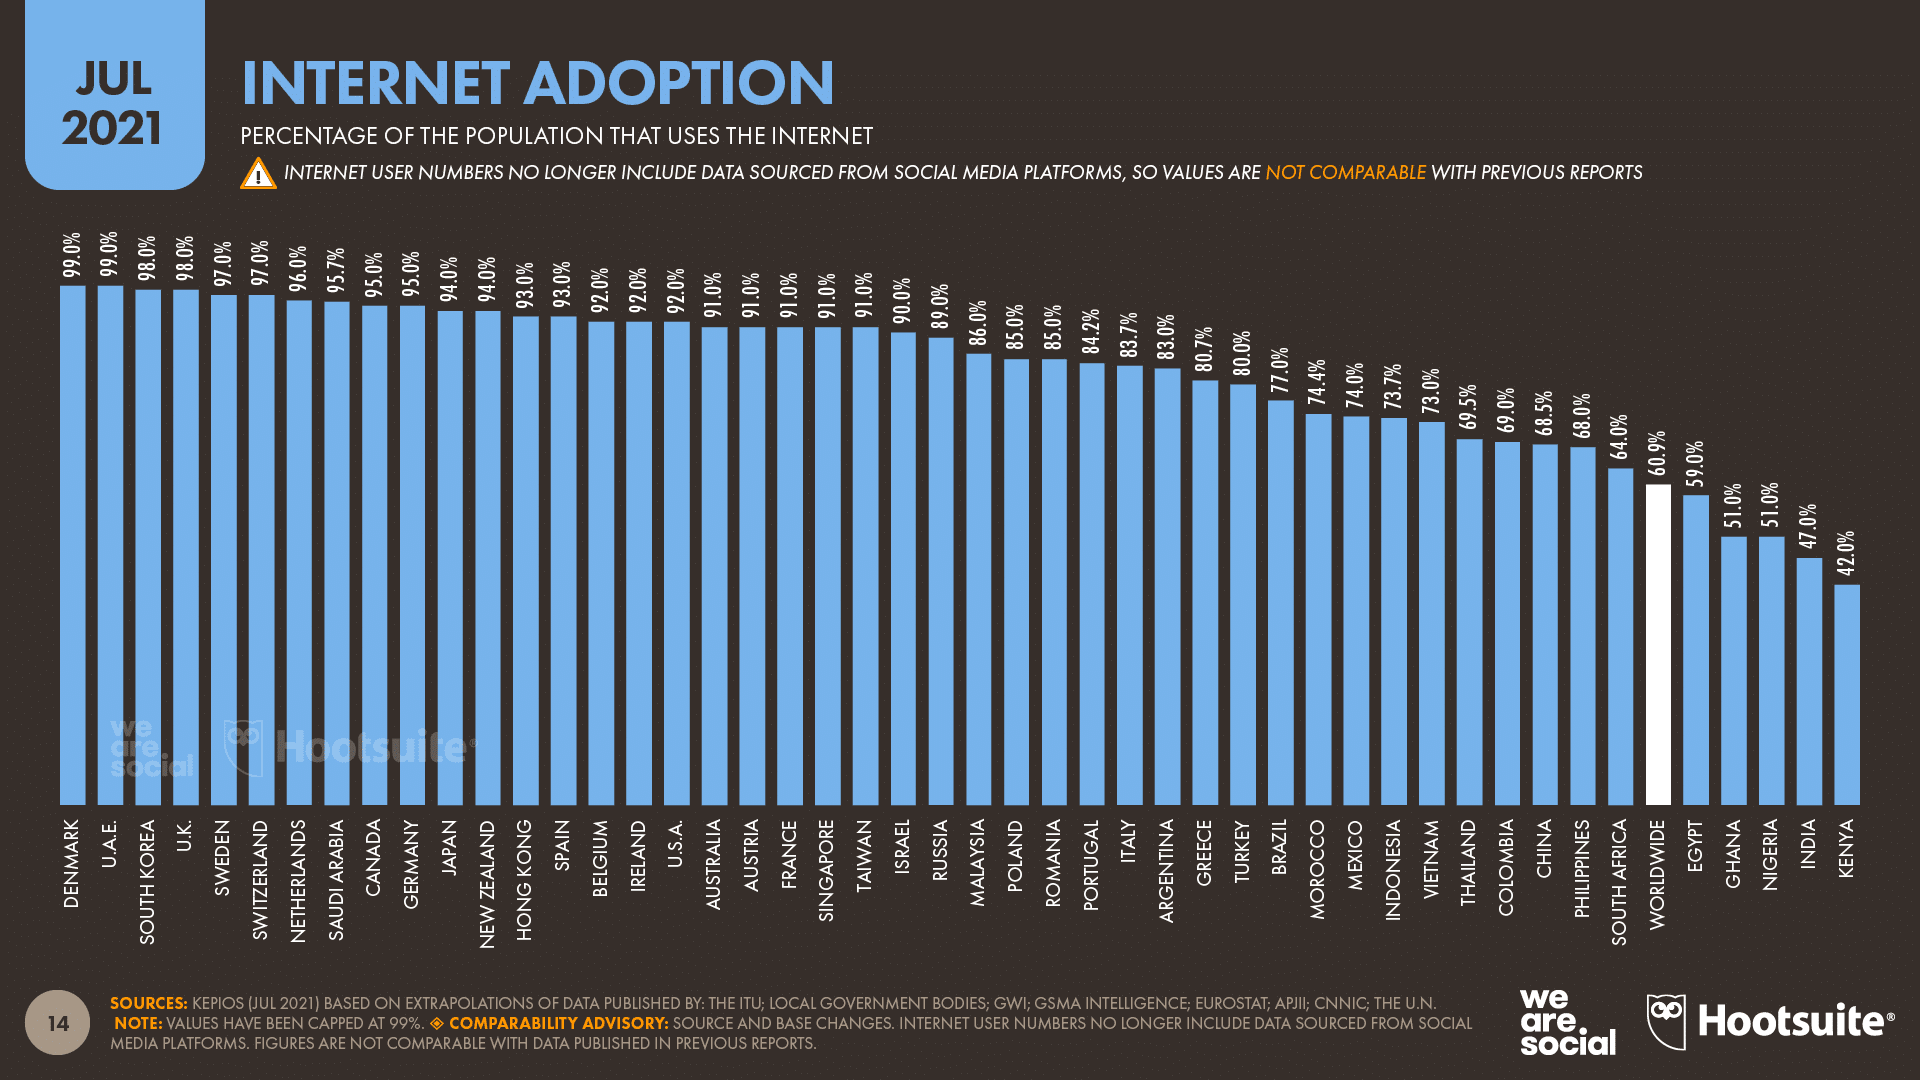 chart showing internet adoption as of July 2021